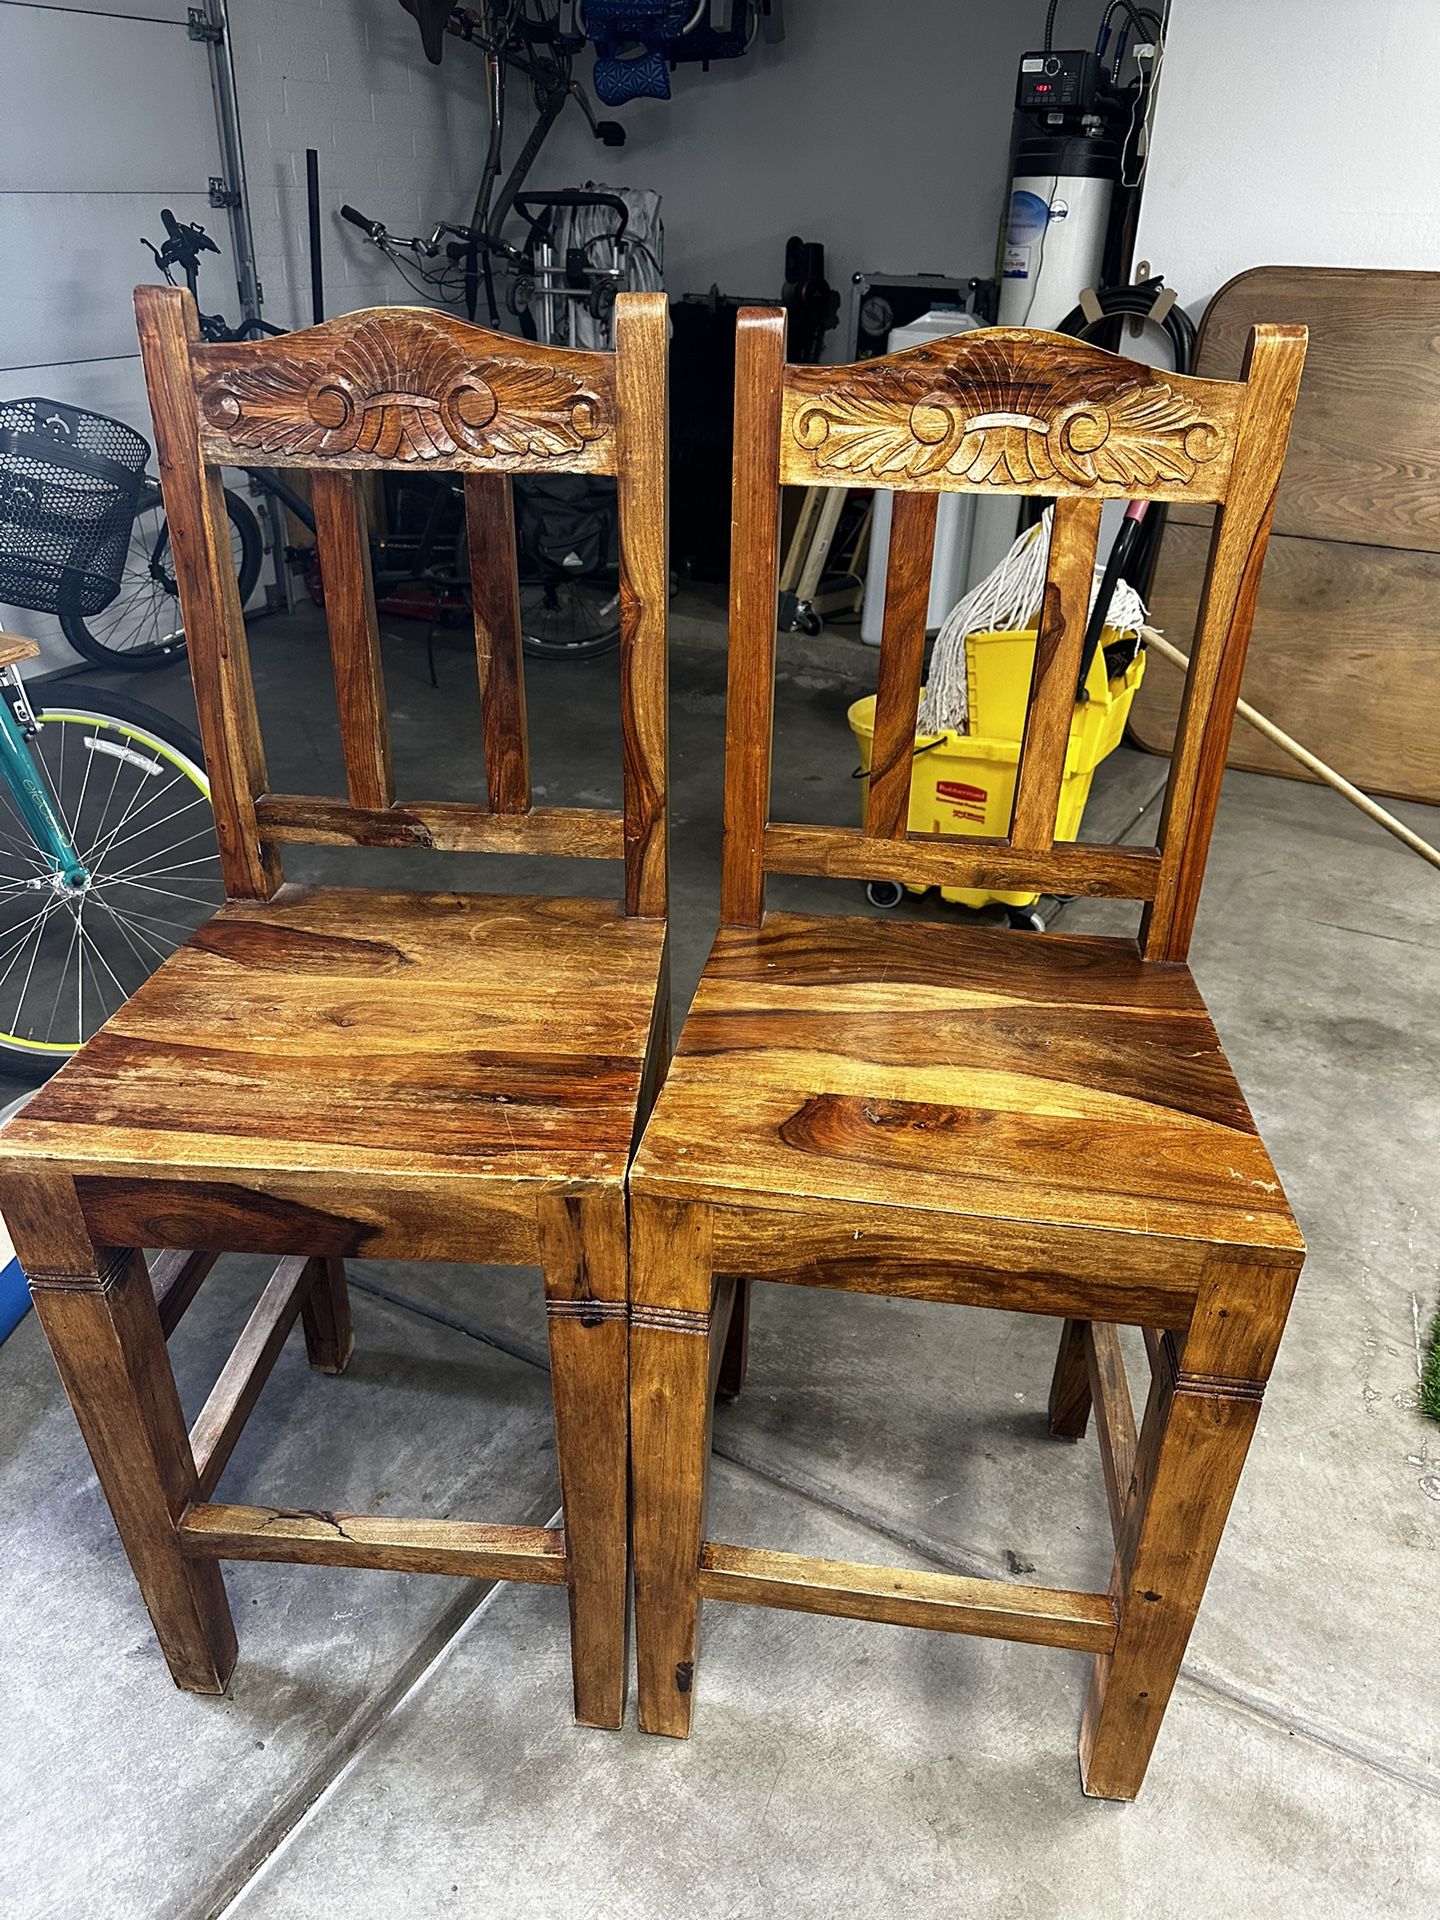 2 Hand Carved Wooden Bar Stools 